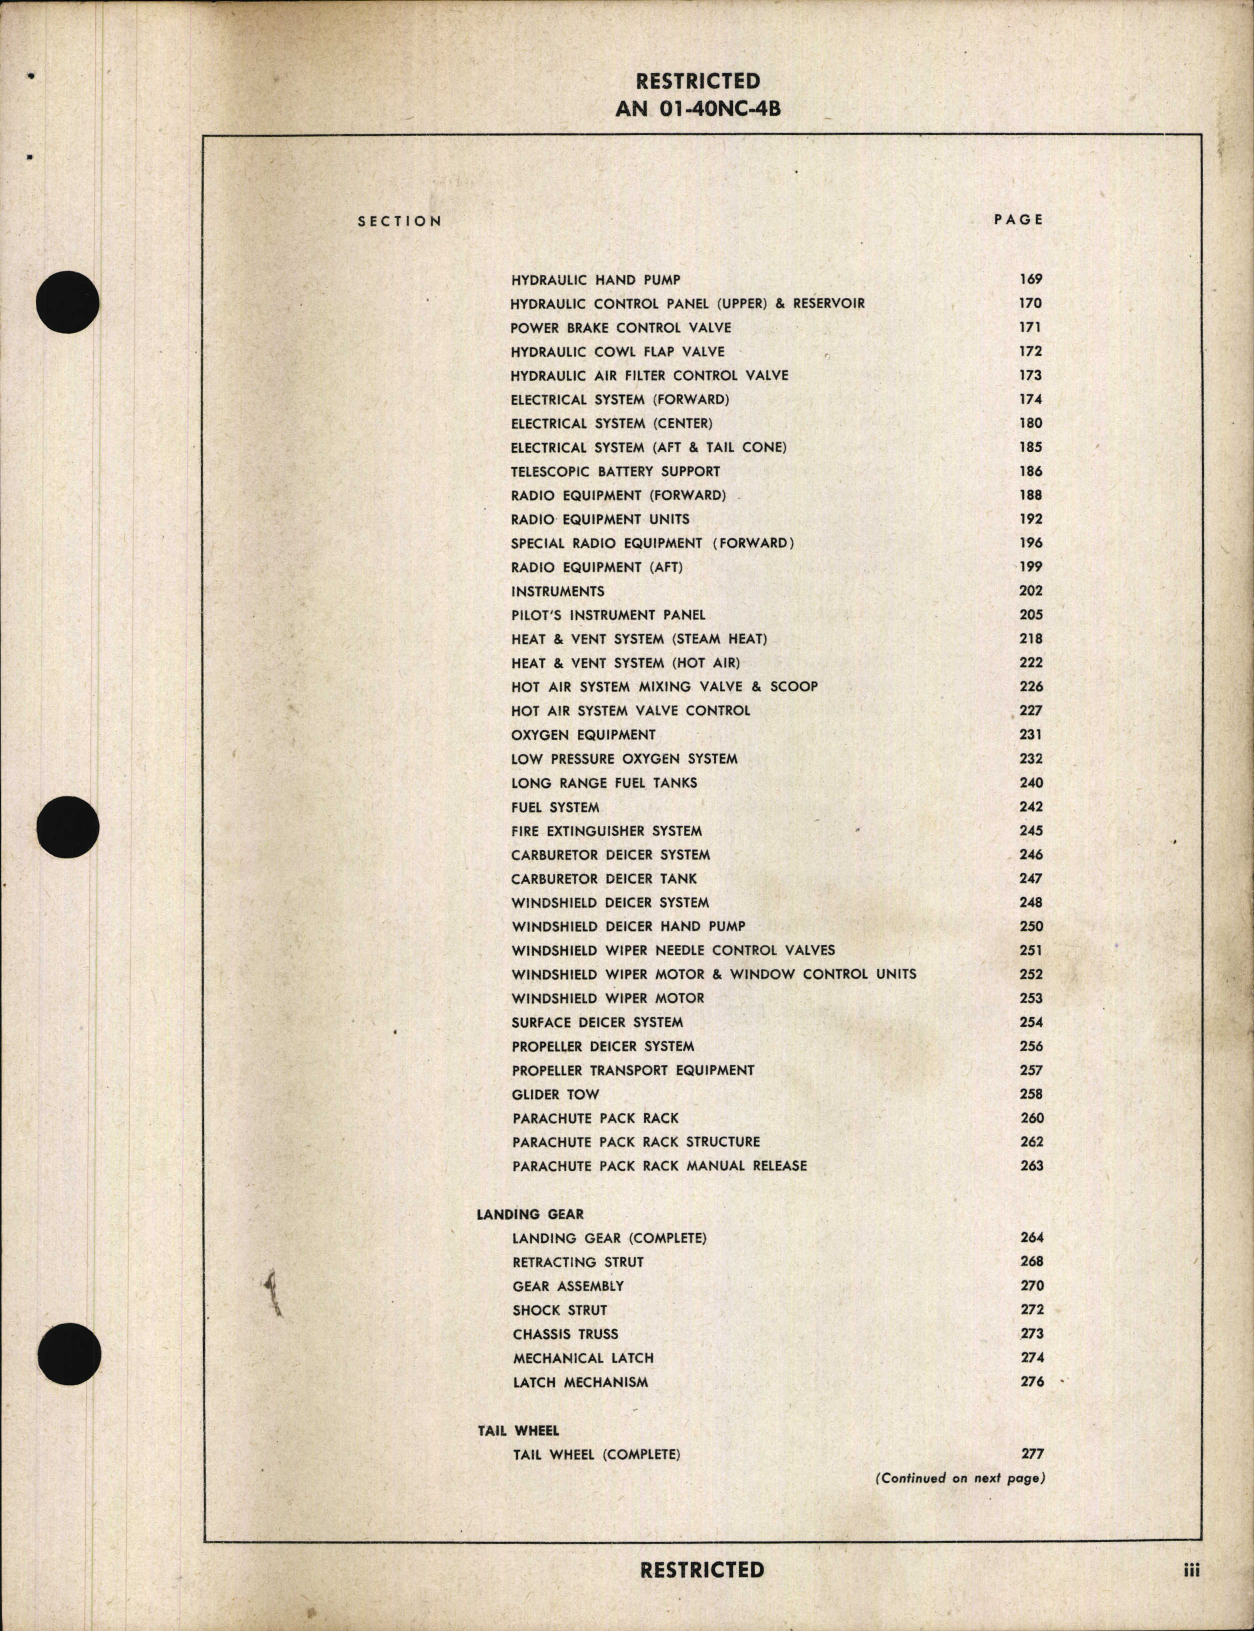 Sample page 7 from AirCorps Library document: Parts Catalog for C-47A and R4D-5 Airplanes